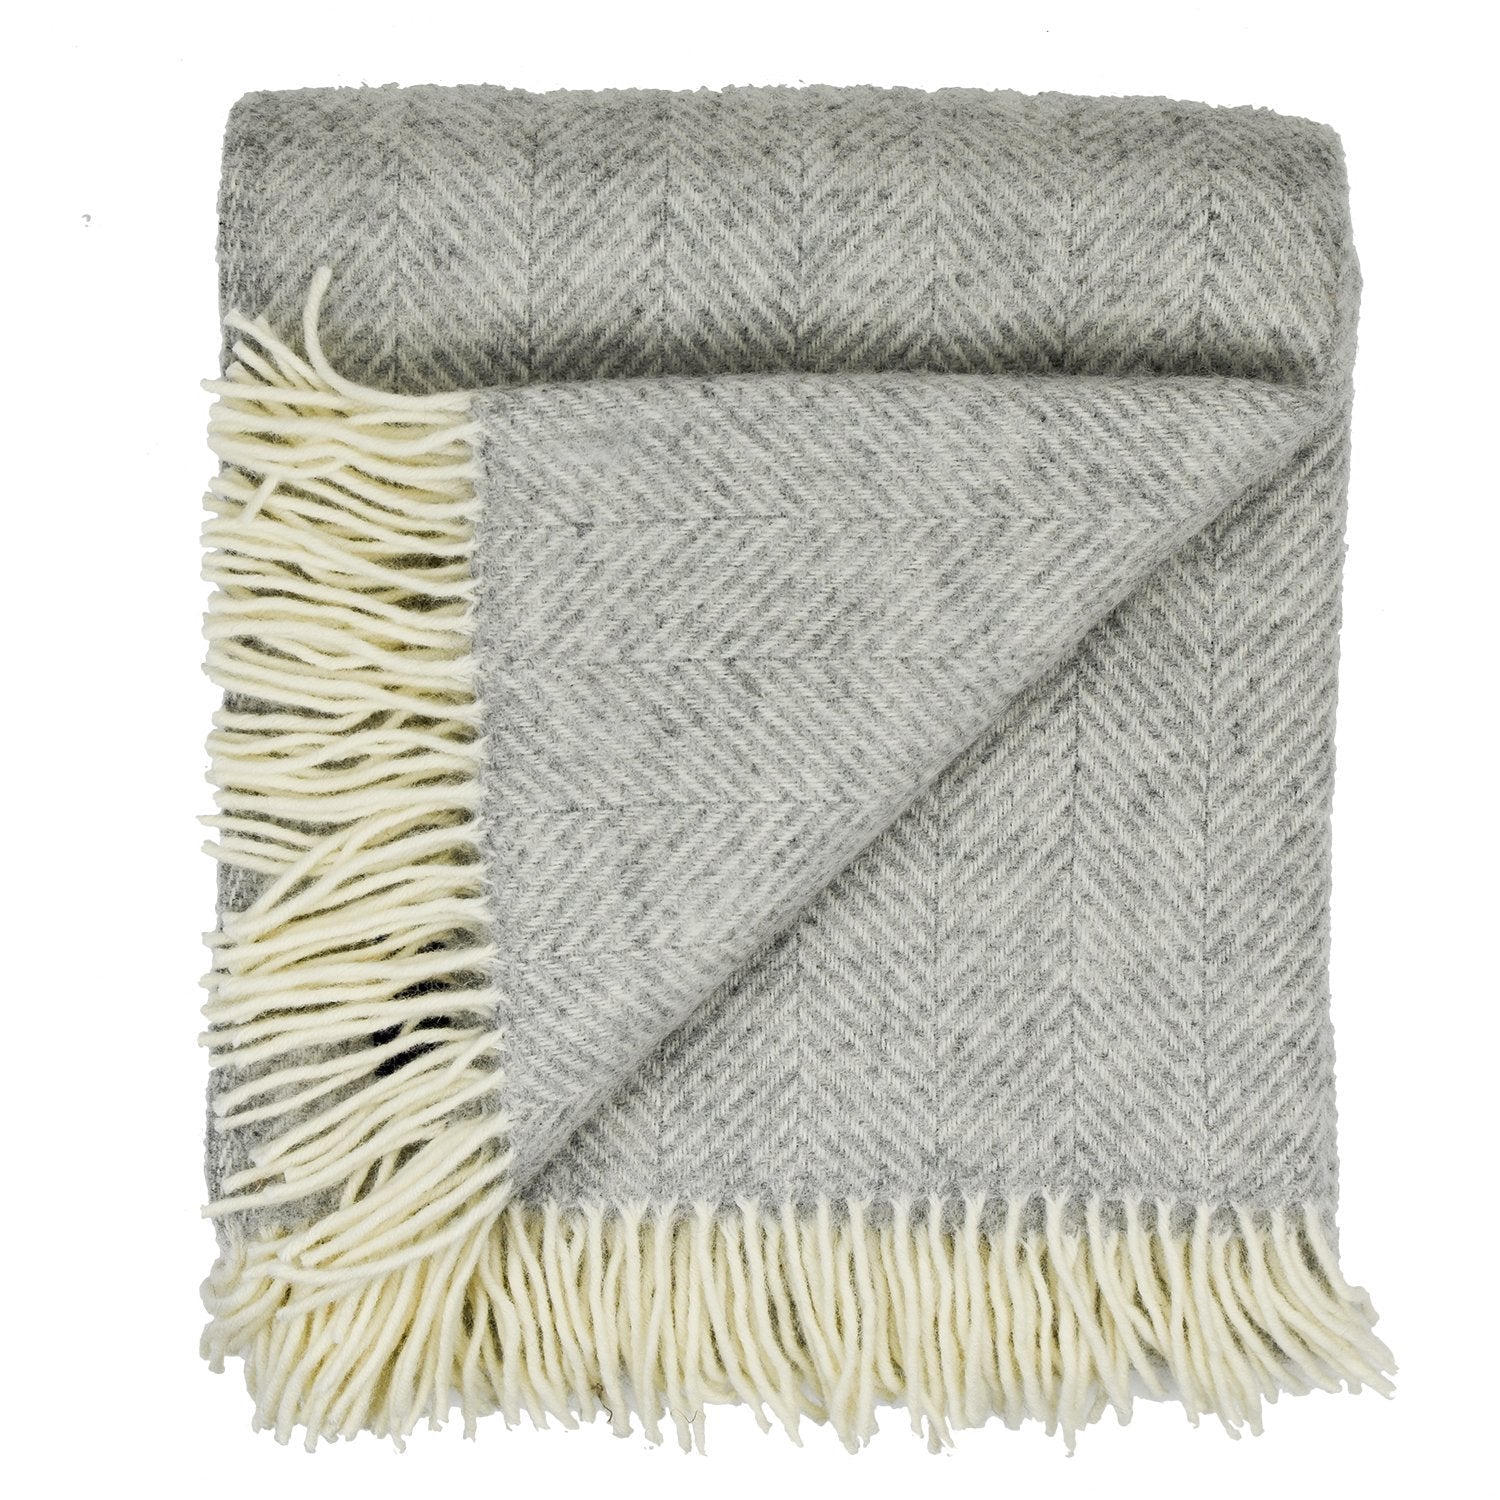 Highland Tweed Herringbone Pure New Wool Throw ~ Silver ~-Throws and Blankets-Prince of Scots-00810032750046-K4050030-013-Prince of Scots